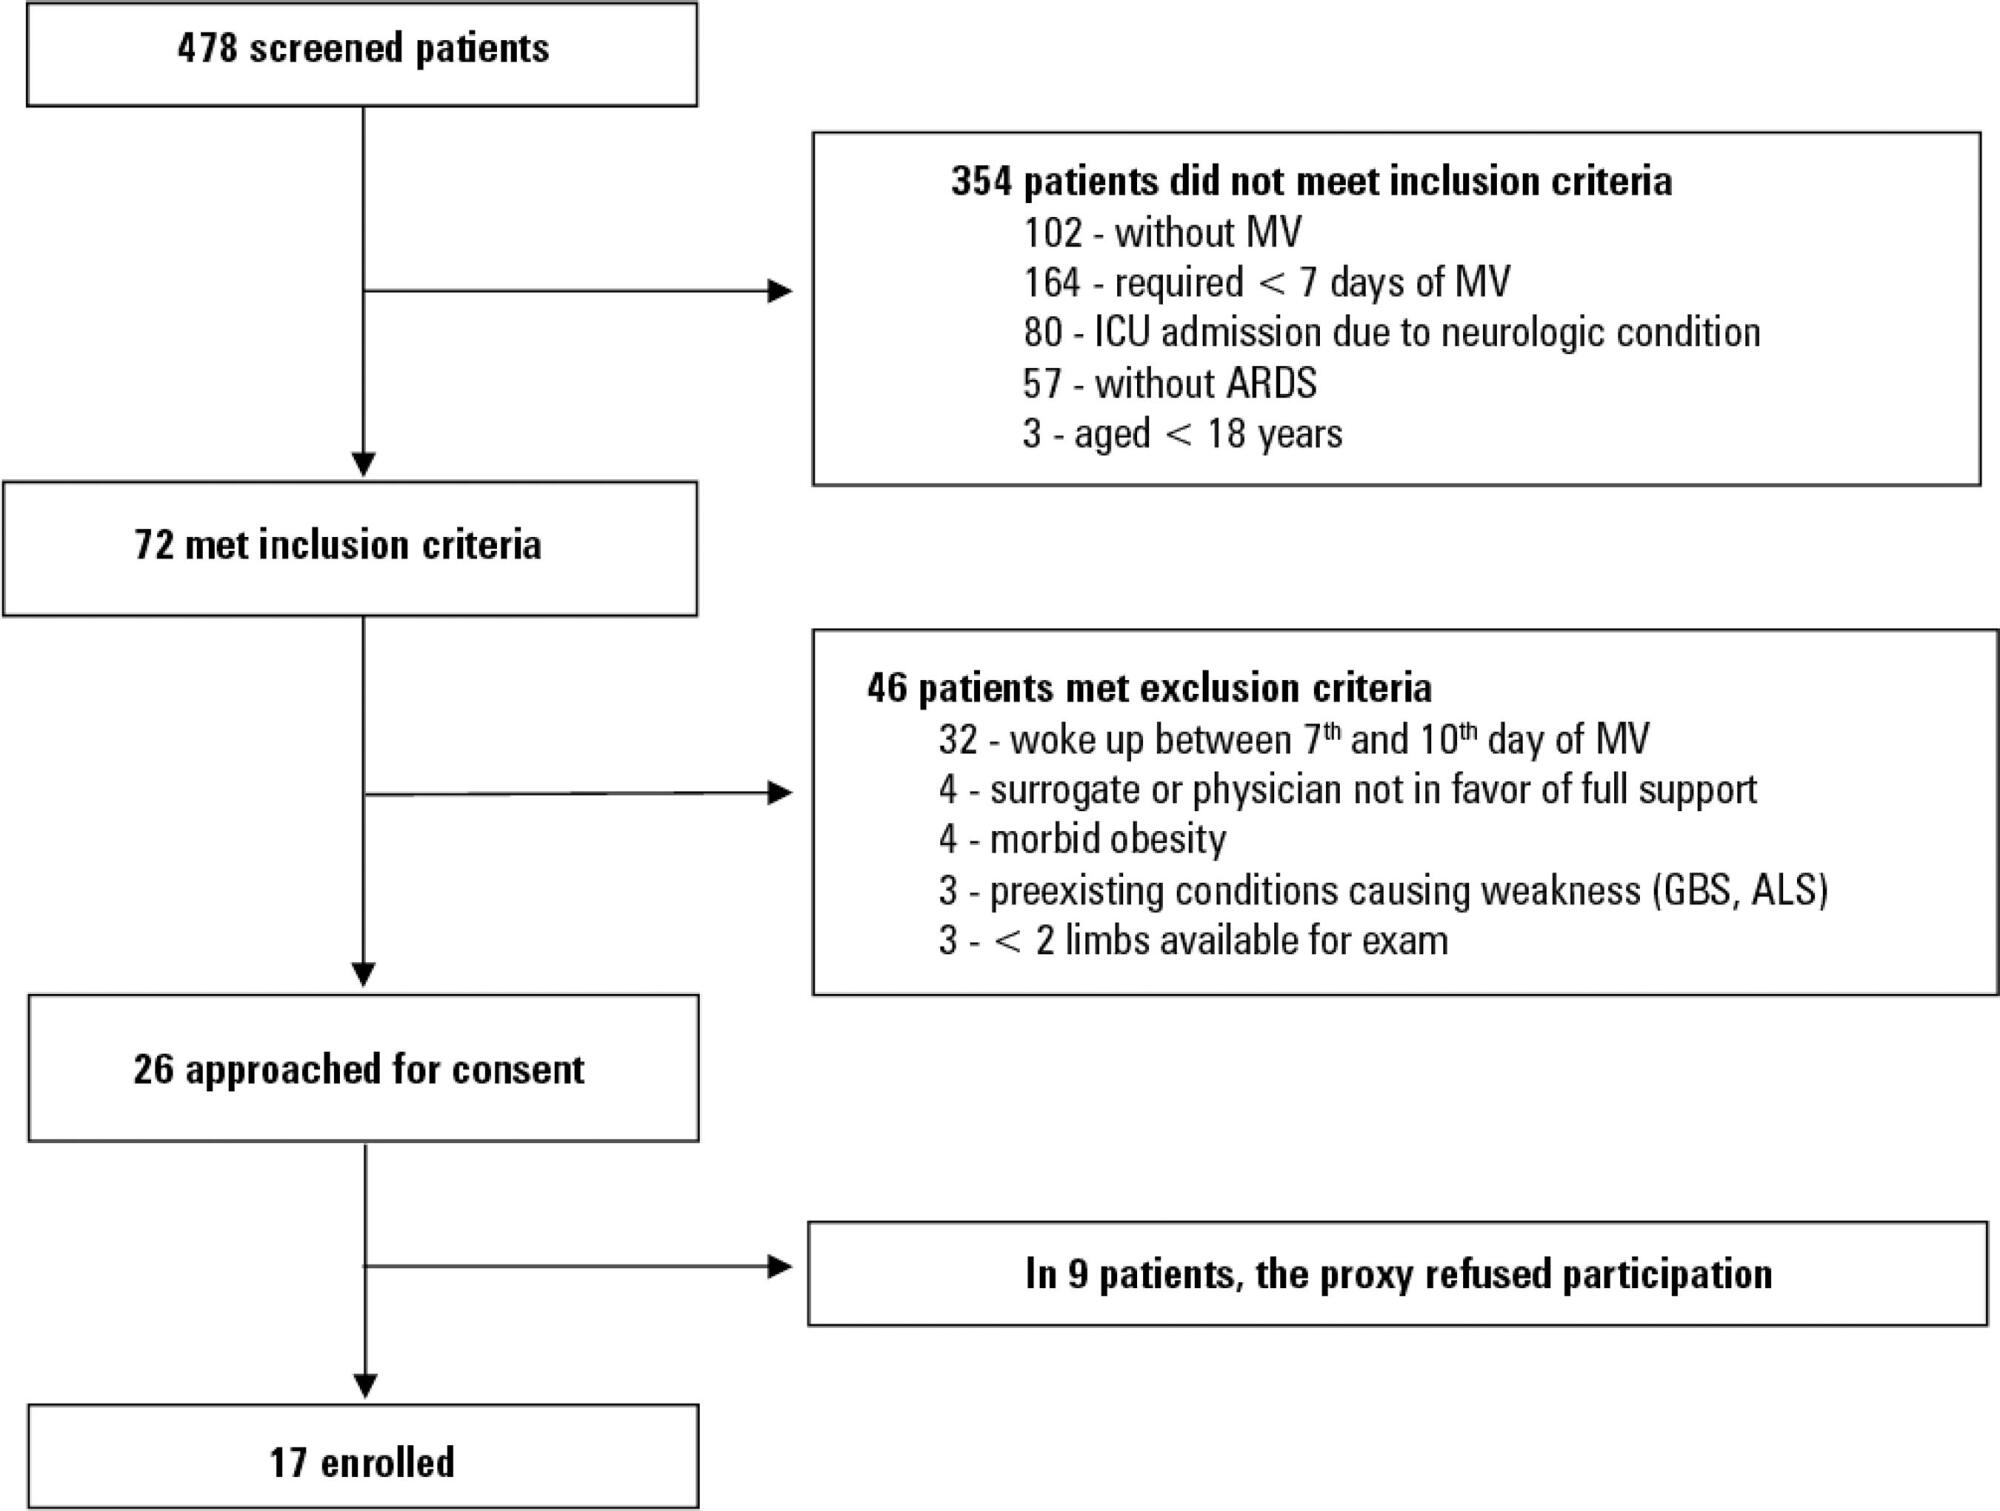 Association between electromyographical findings and intensive care unit mortality among mechanically ventilated acute respiratory distress syndrome patients under profound sedation